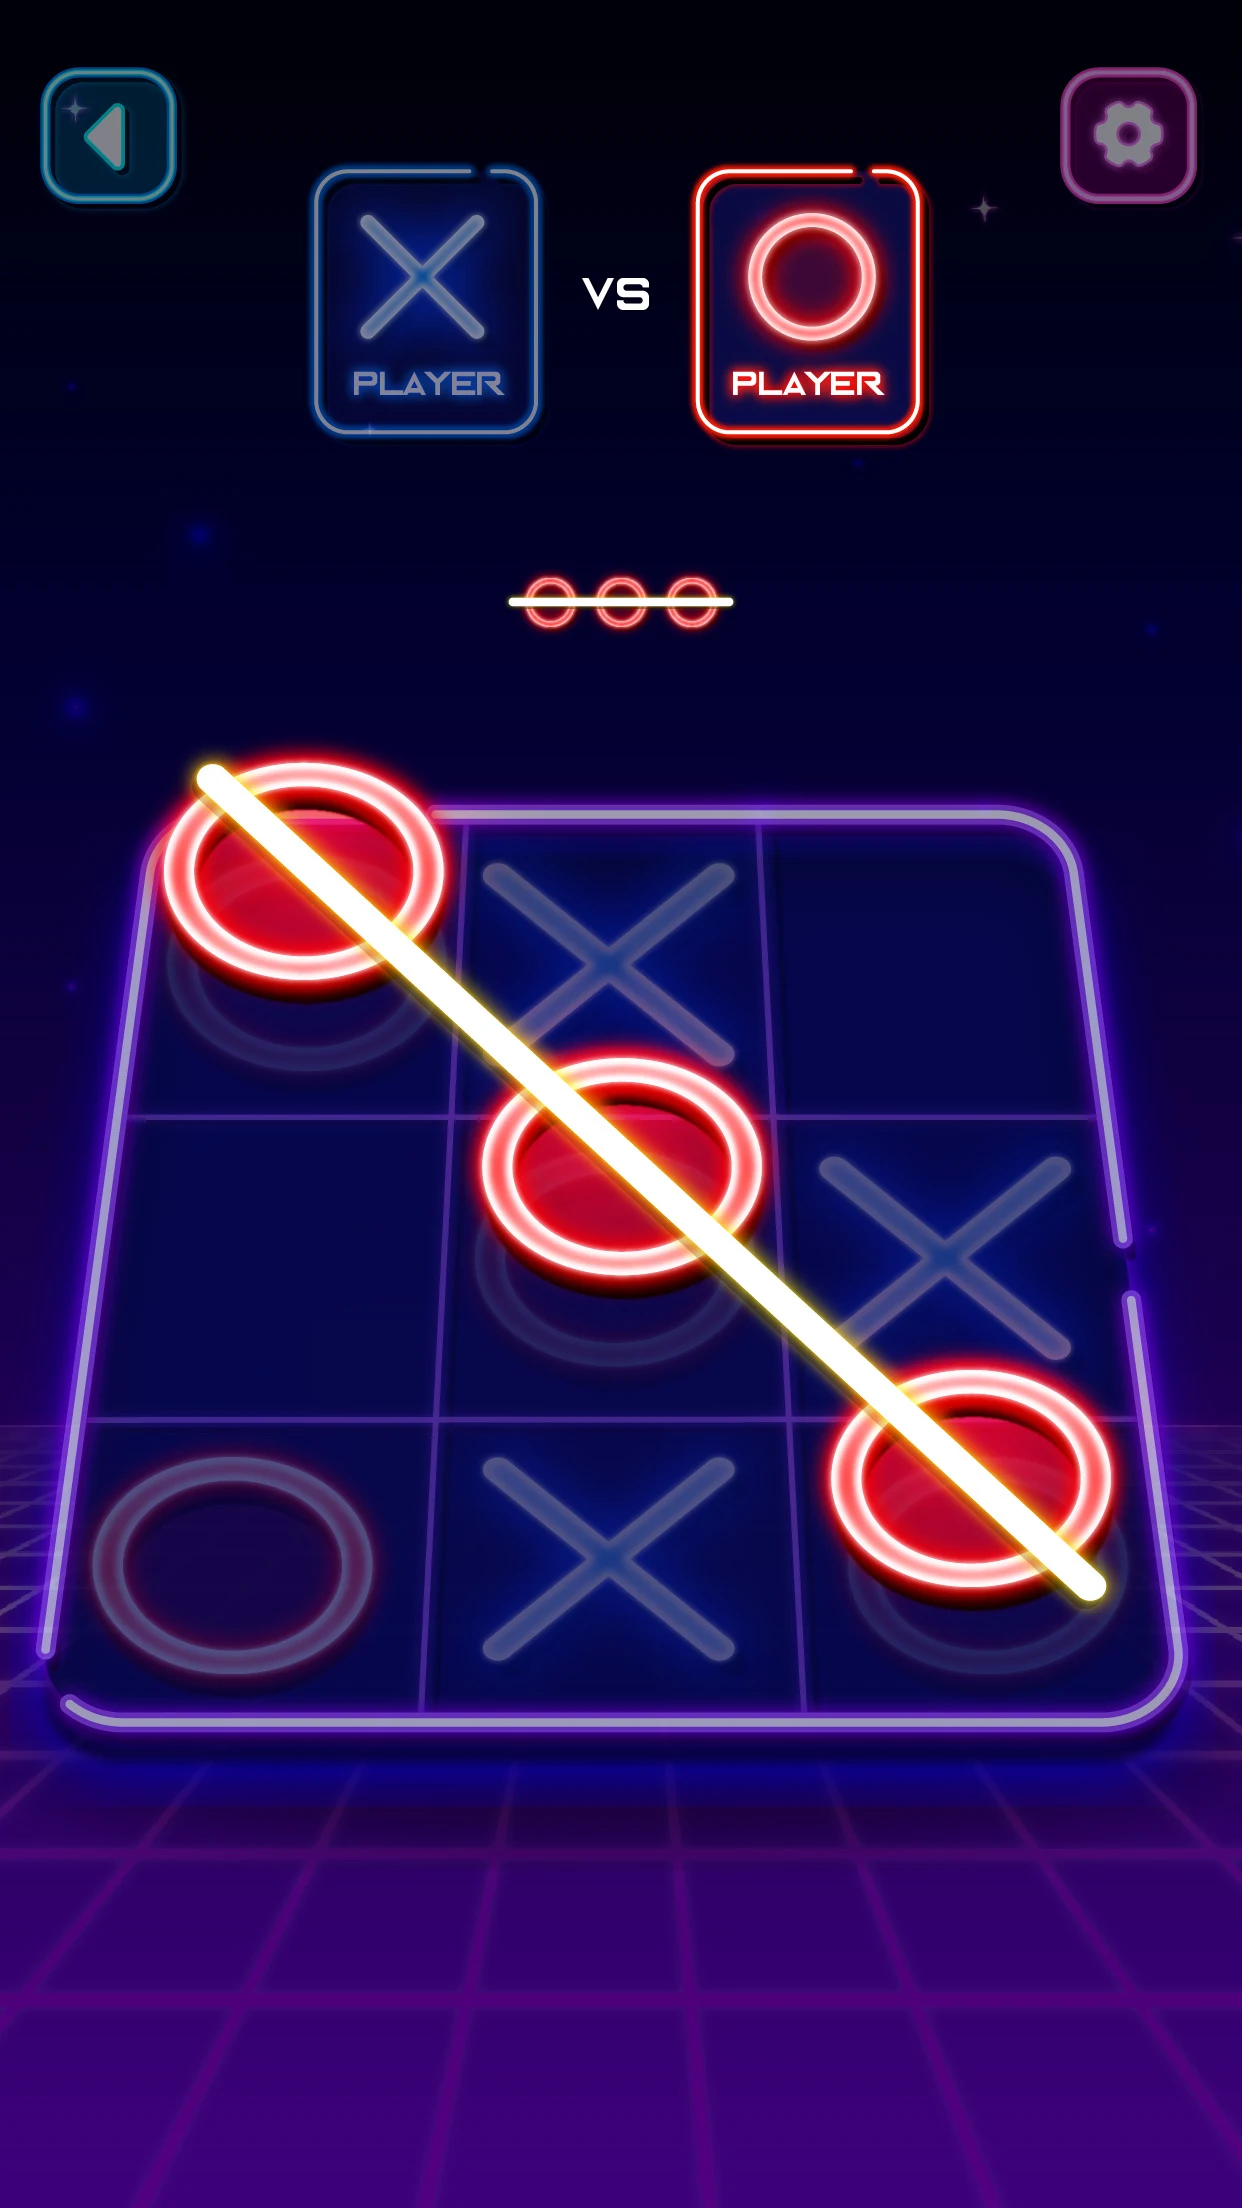 Tic Tac Toe Online puzzle xo Game for Android - Download